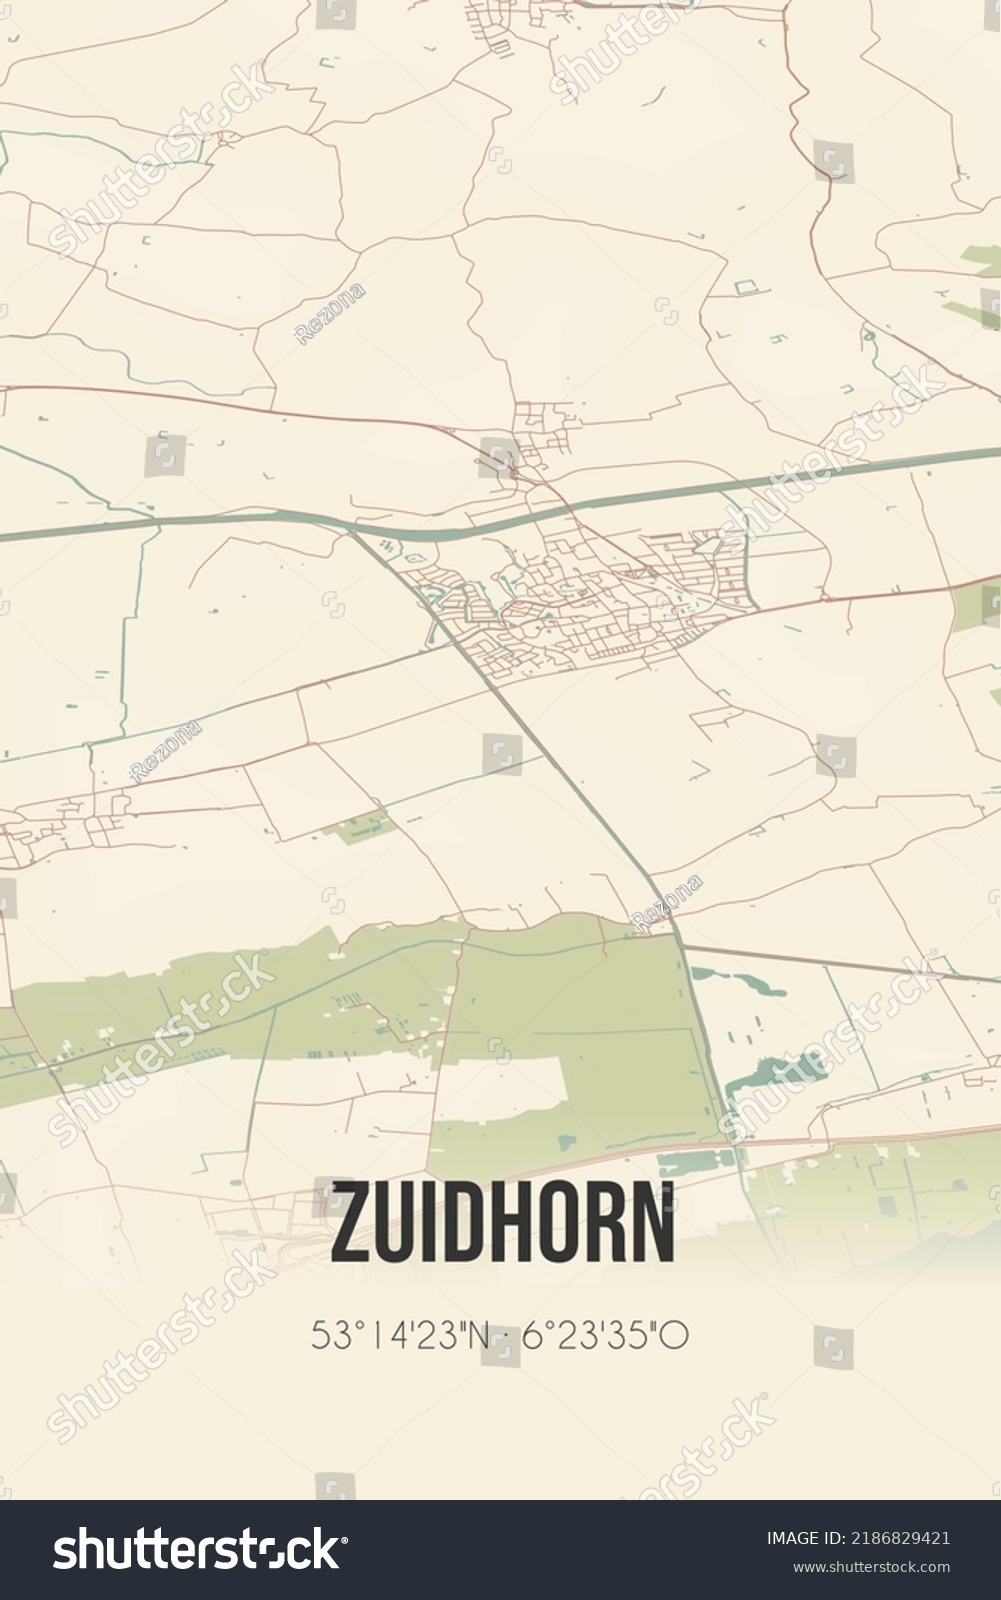 Stock Photo Retro Dutch City Map Of Zuidhorn Located In Groningen Vintage Street Map 2186829421 